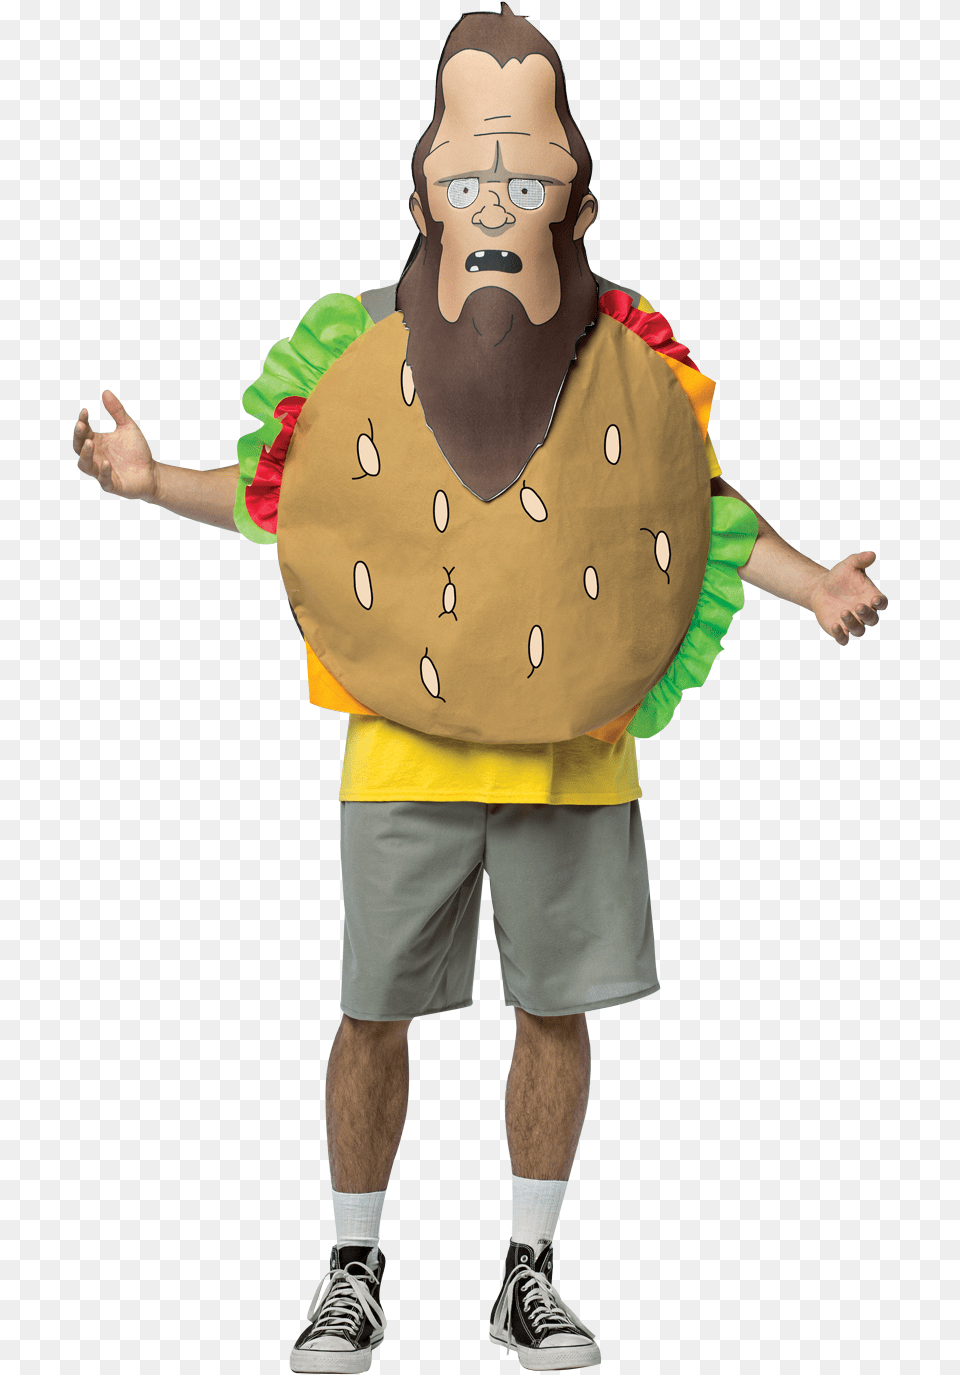 Official Licensed Bobs Burgers Beefsquatch Costume Bob39s Burgers Beefsquatch Costume, Shorts, Clothing, Shoe, Footwear Png Image